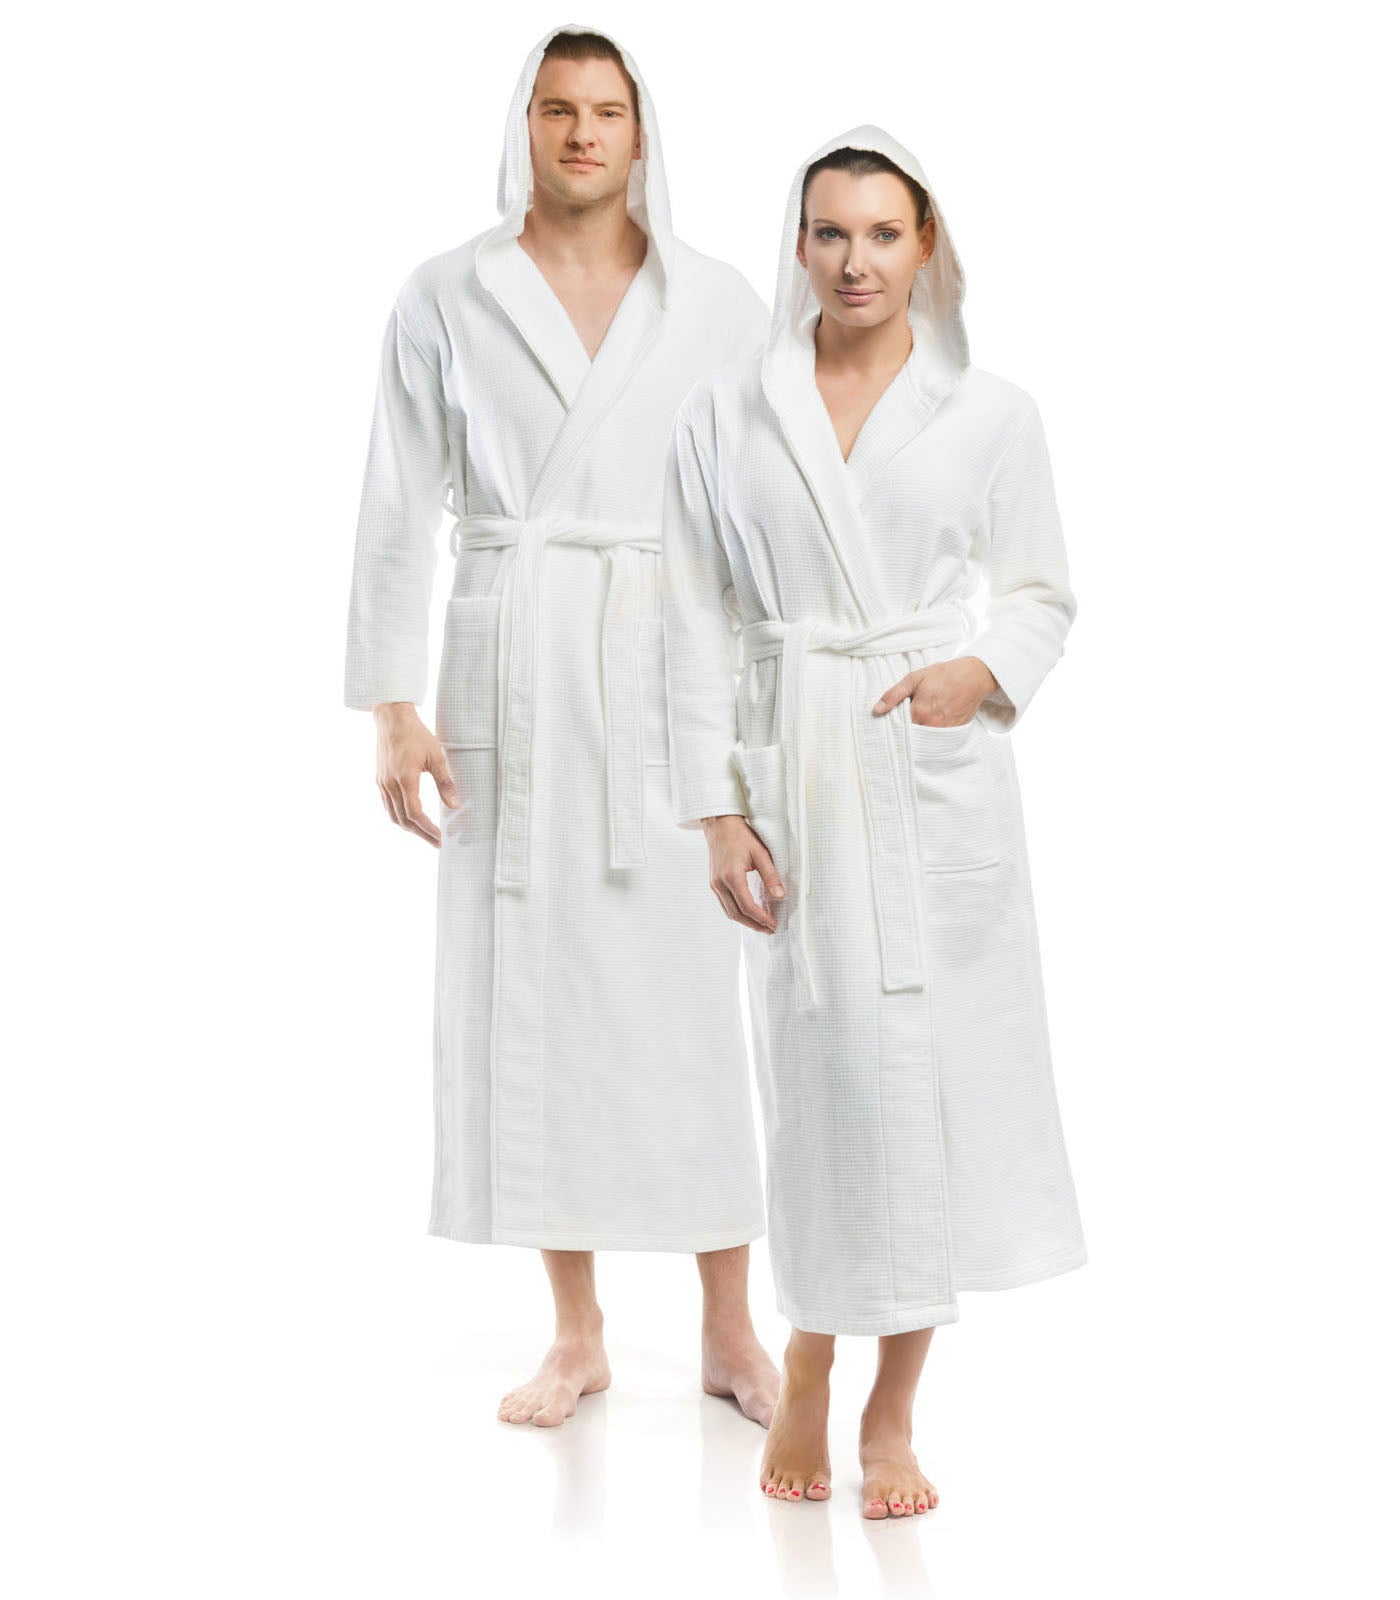 How To Find The Perfect Size in His and Hers Robes